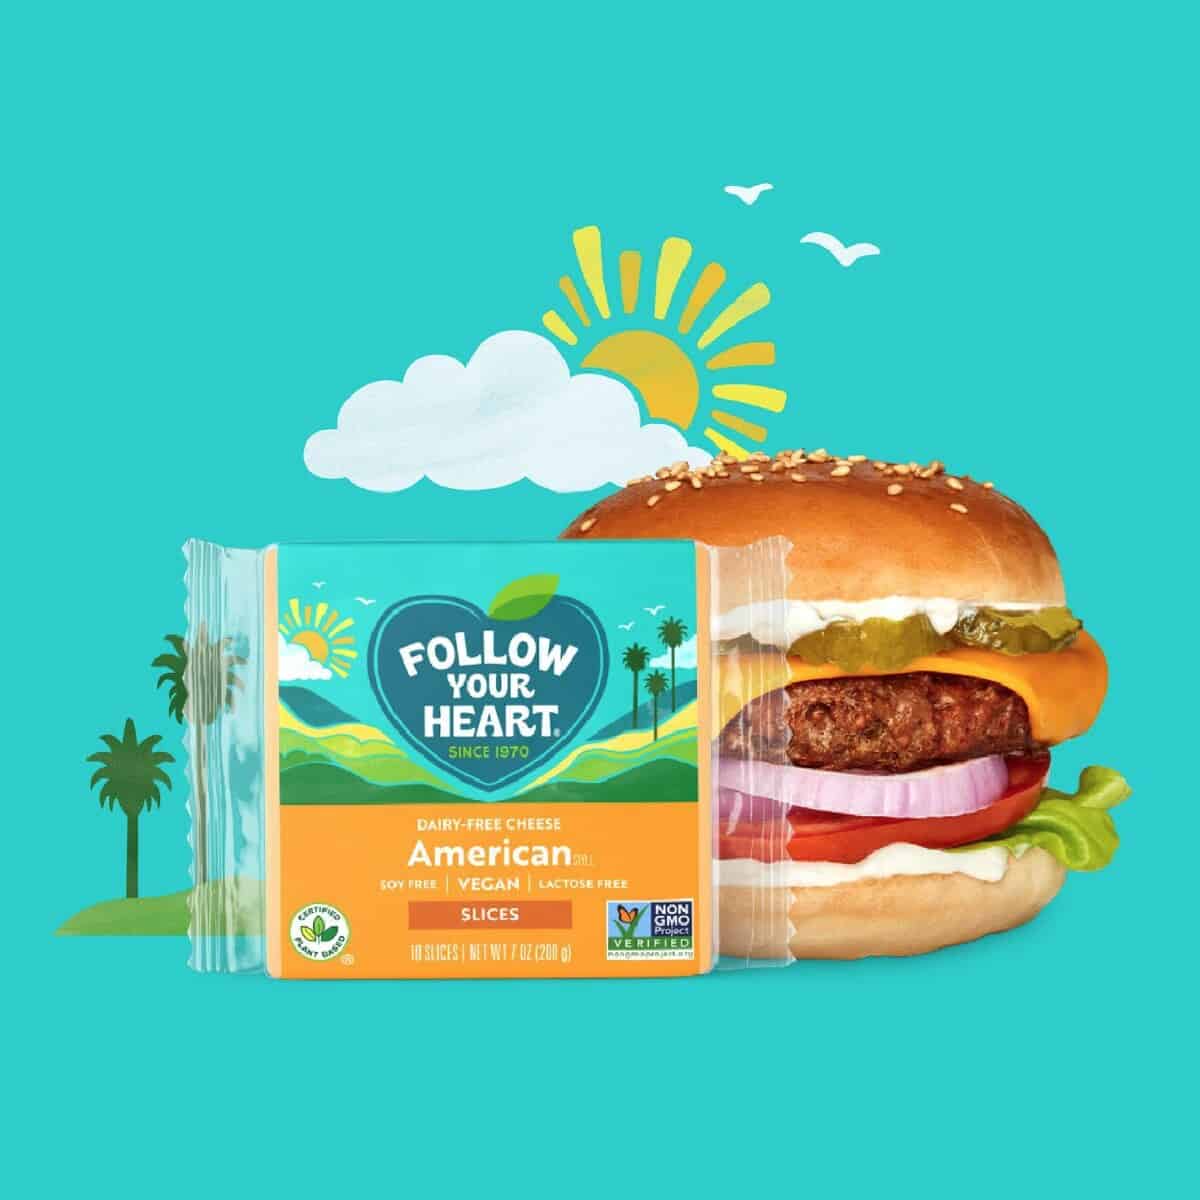 A turquoise and orange package of Follow Your Heart vegan cheese slices next to a loaded veggie burger against a turquoise background with drawn sun, clouds and trees. 